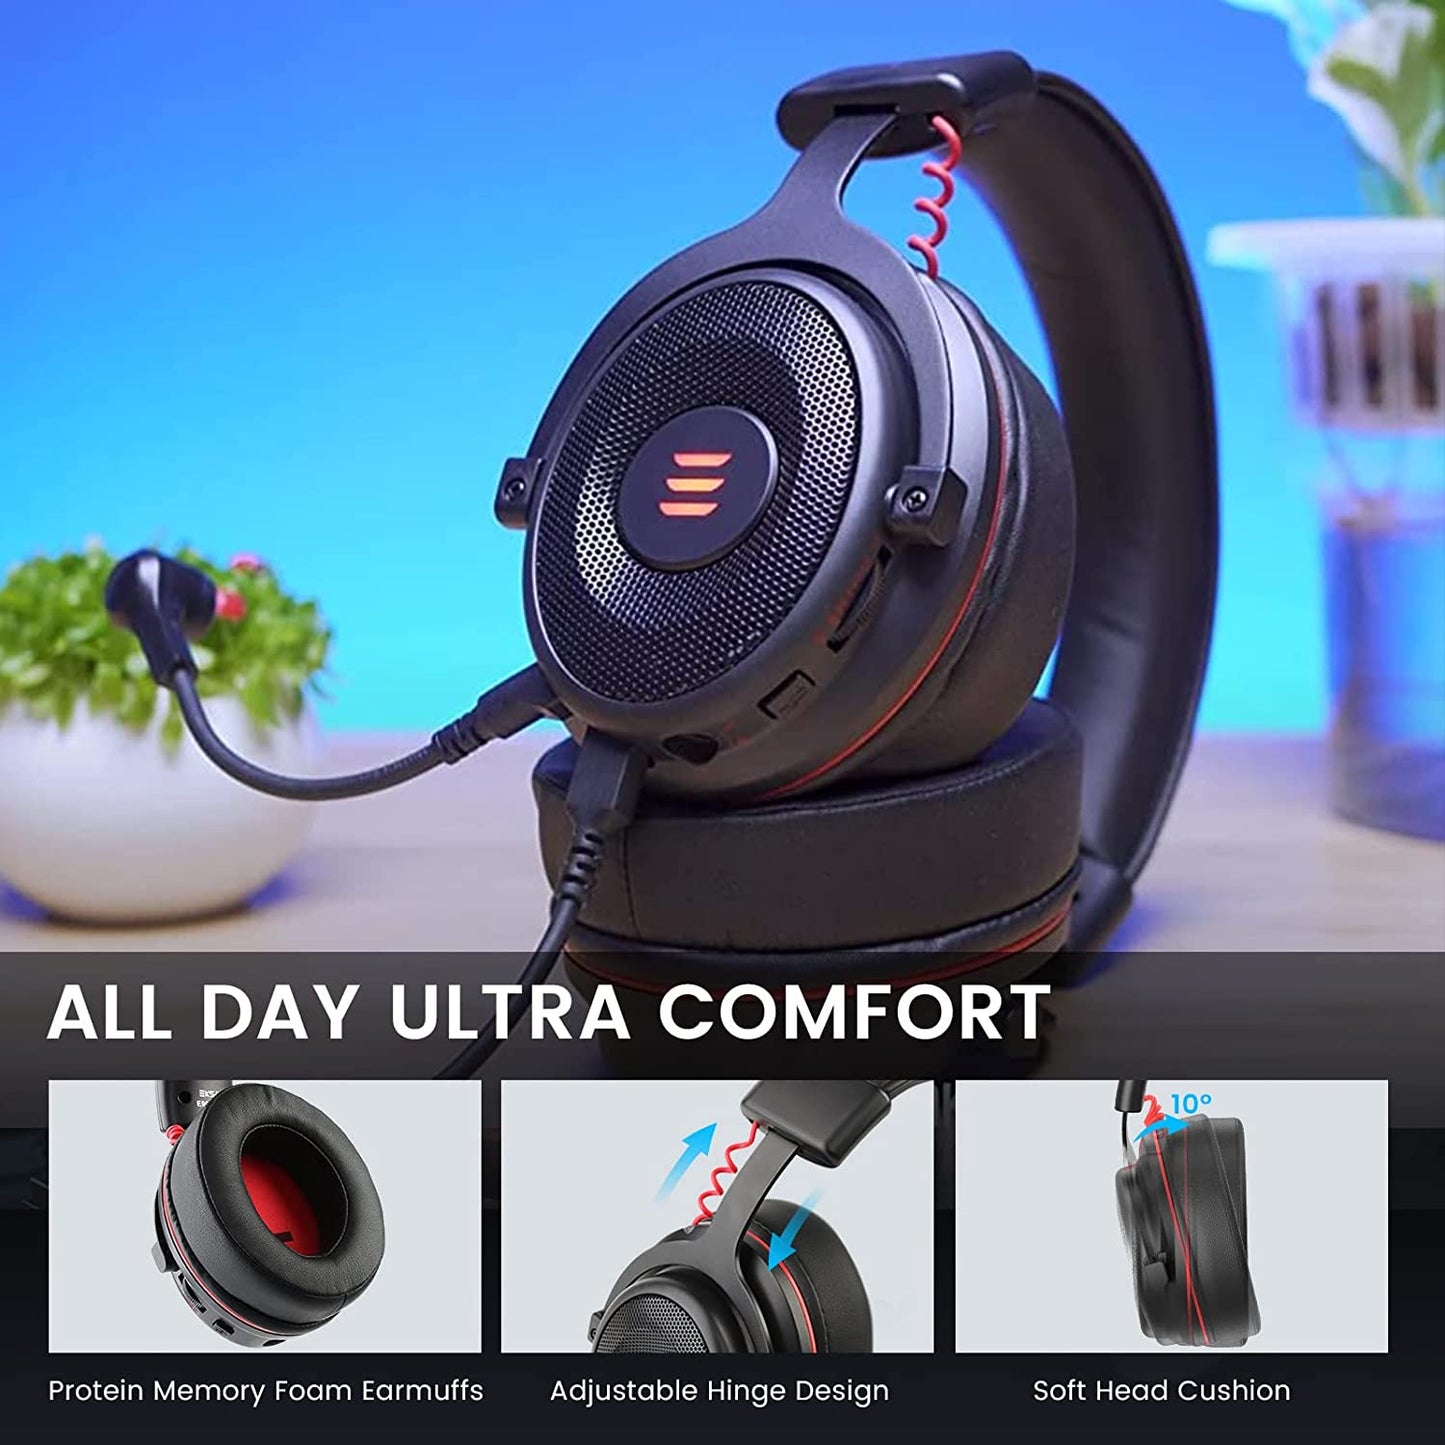 Professional USB Gaming Headset for PC with Detachable Noise Cancelling Mic and Immersive 7.1 Surround Sound